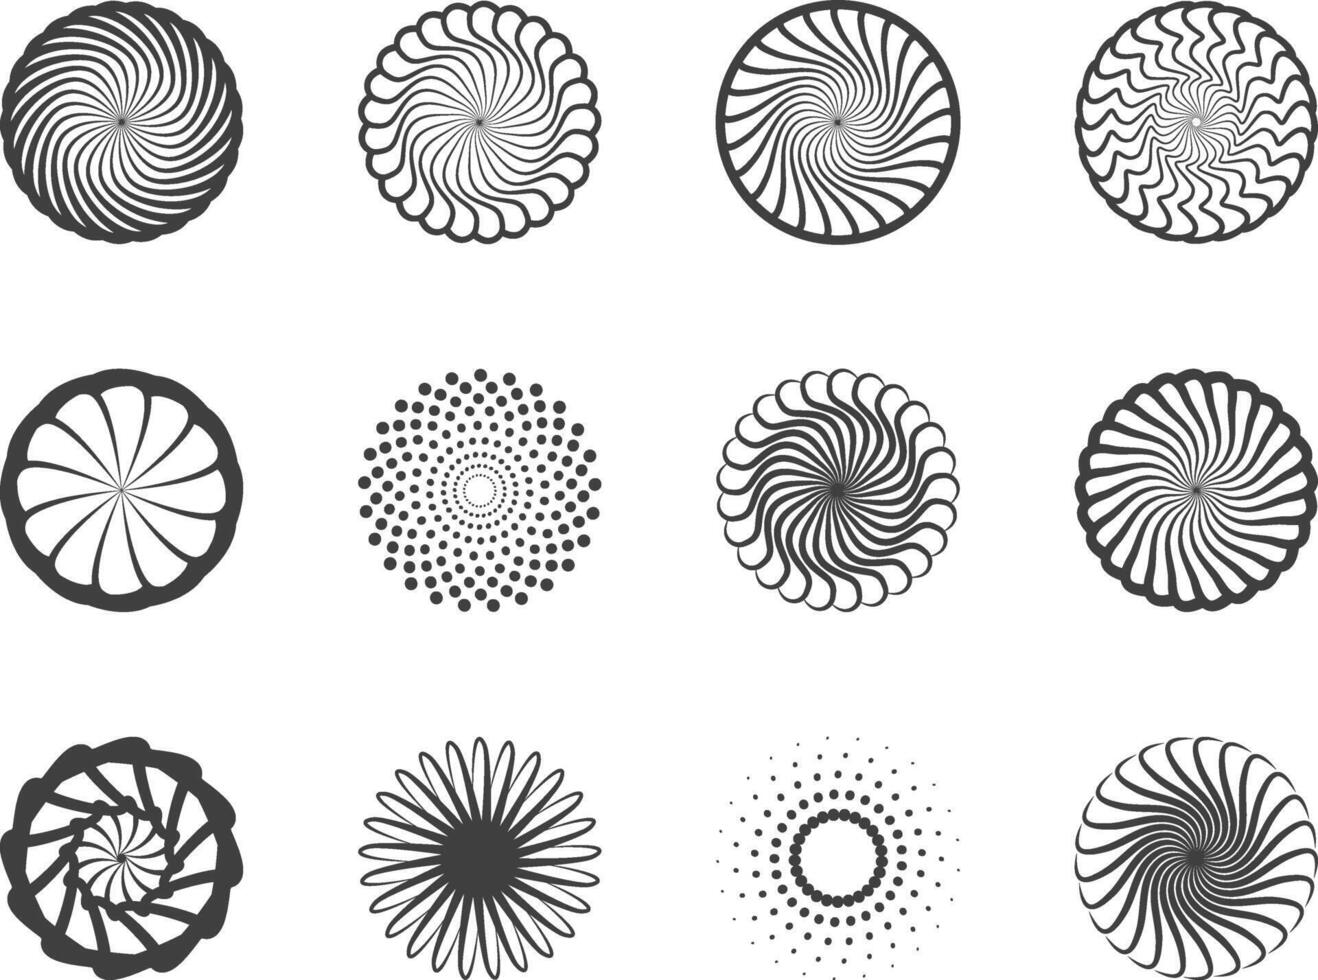 Spiral and swirl motion twisting circles design element set. vector